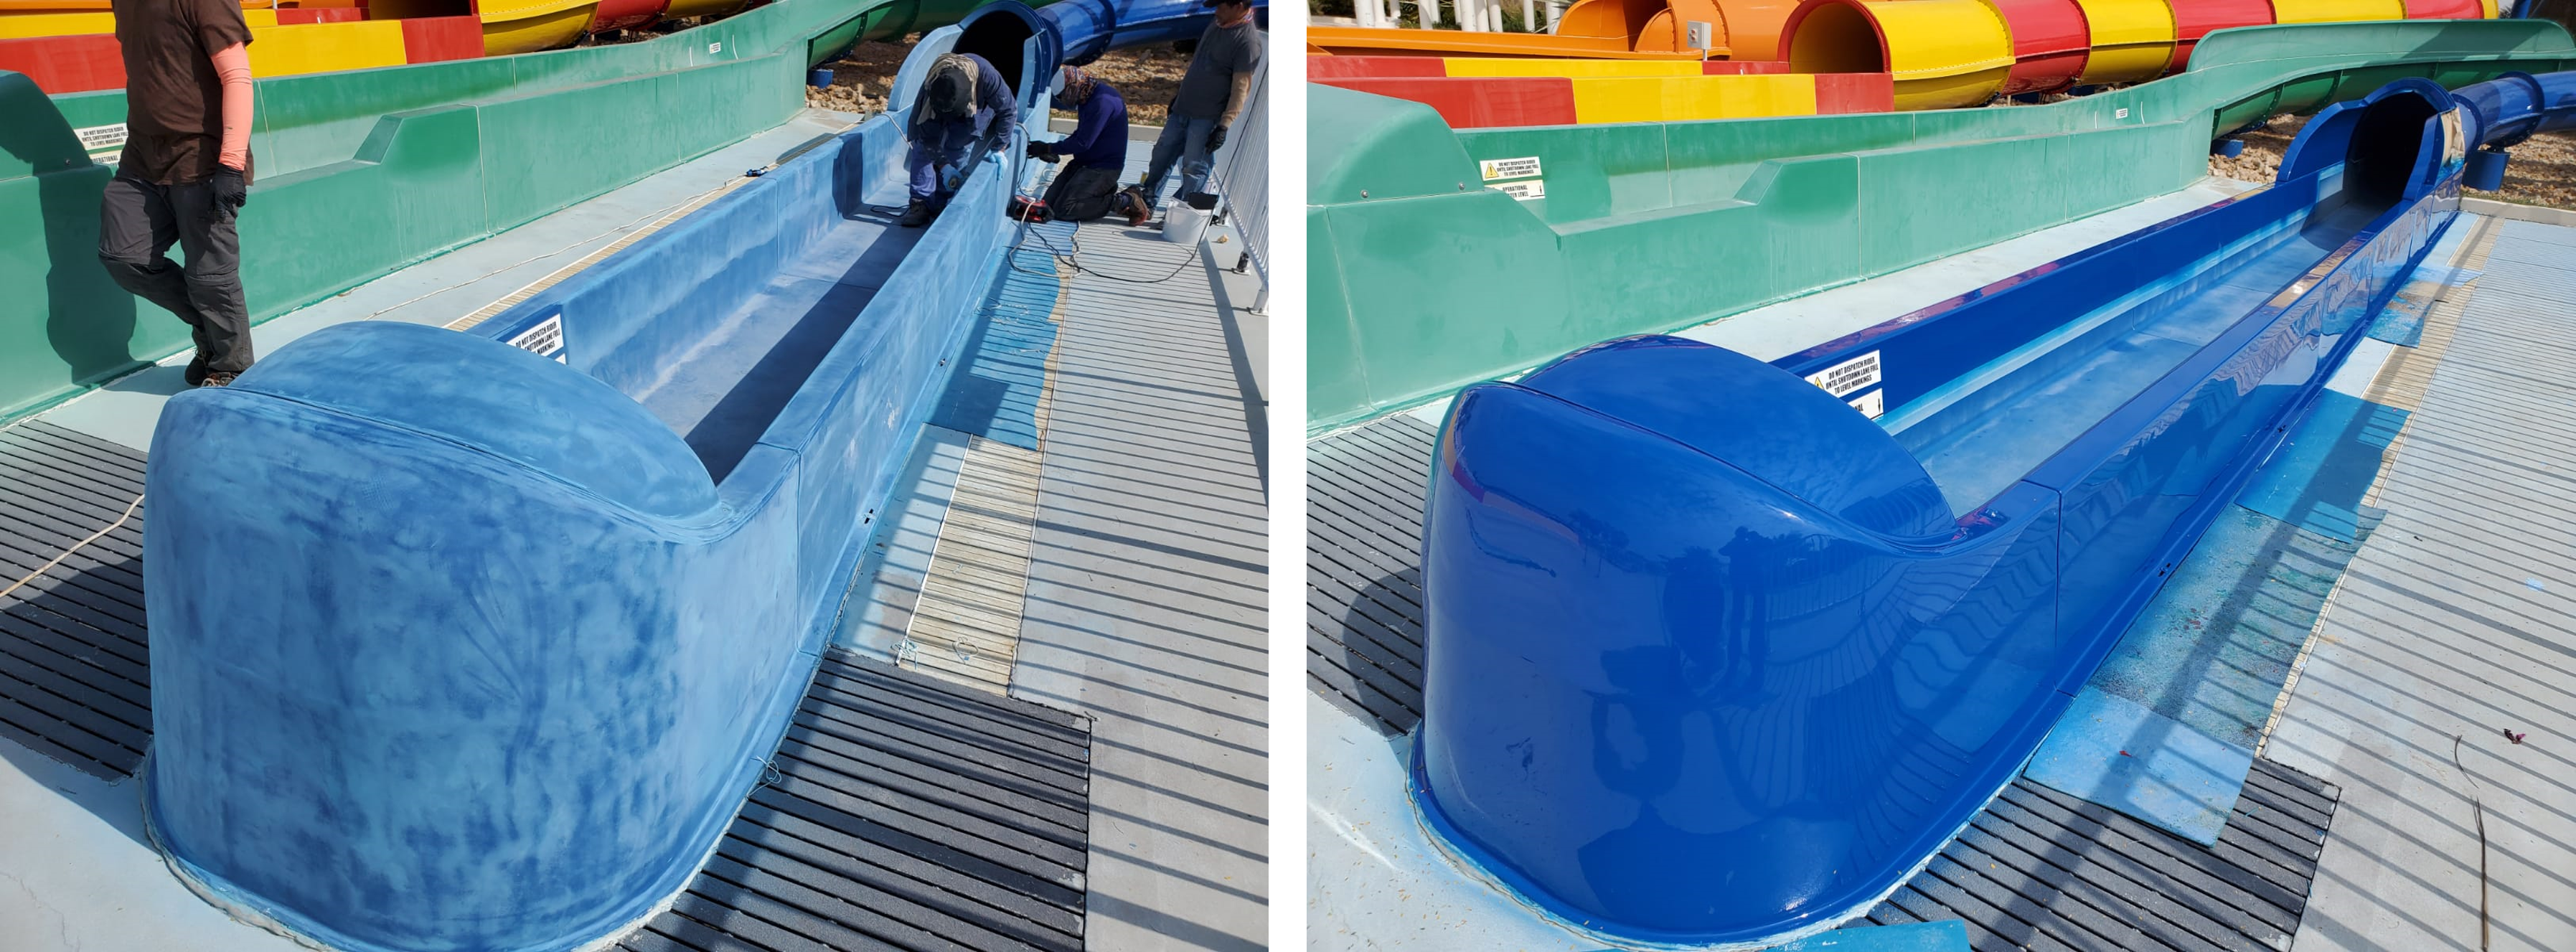 Blue water slide before and after refurbishment comparison